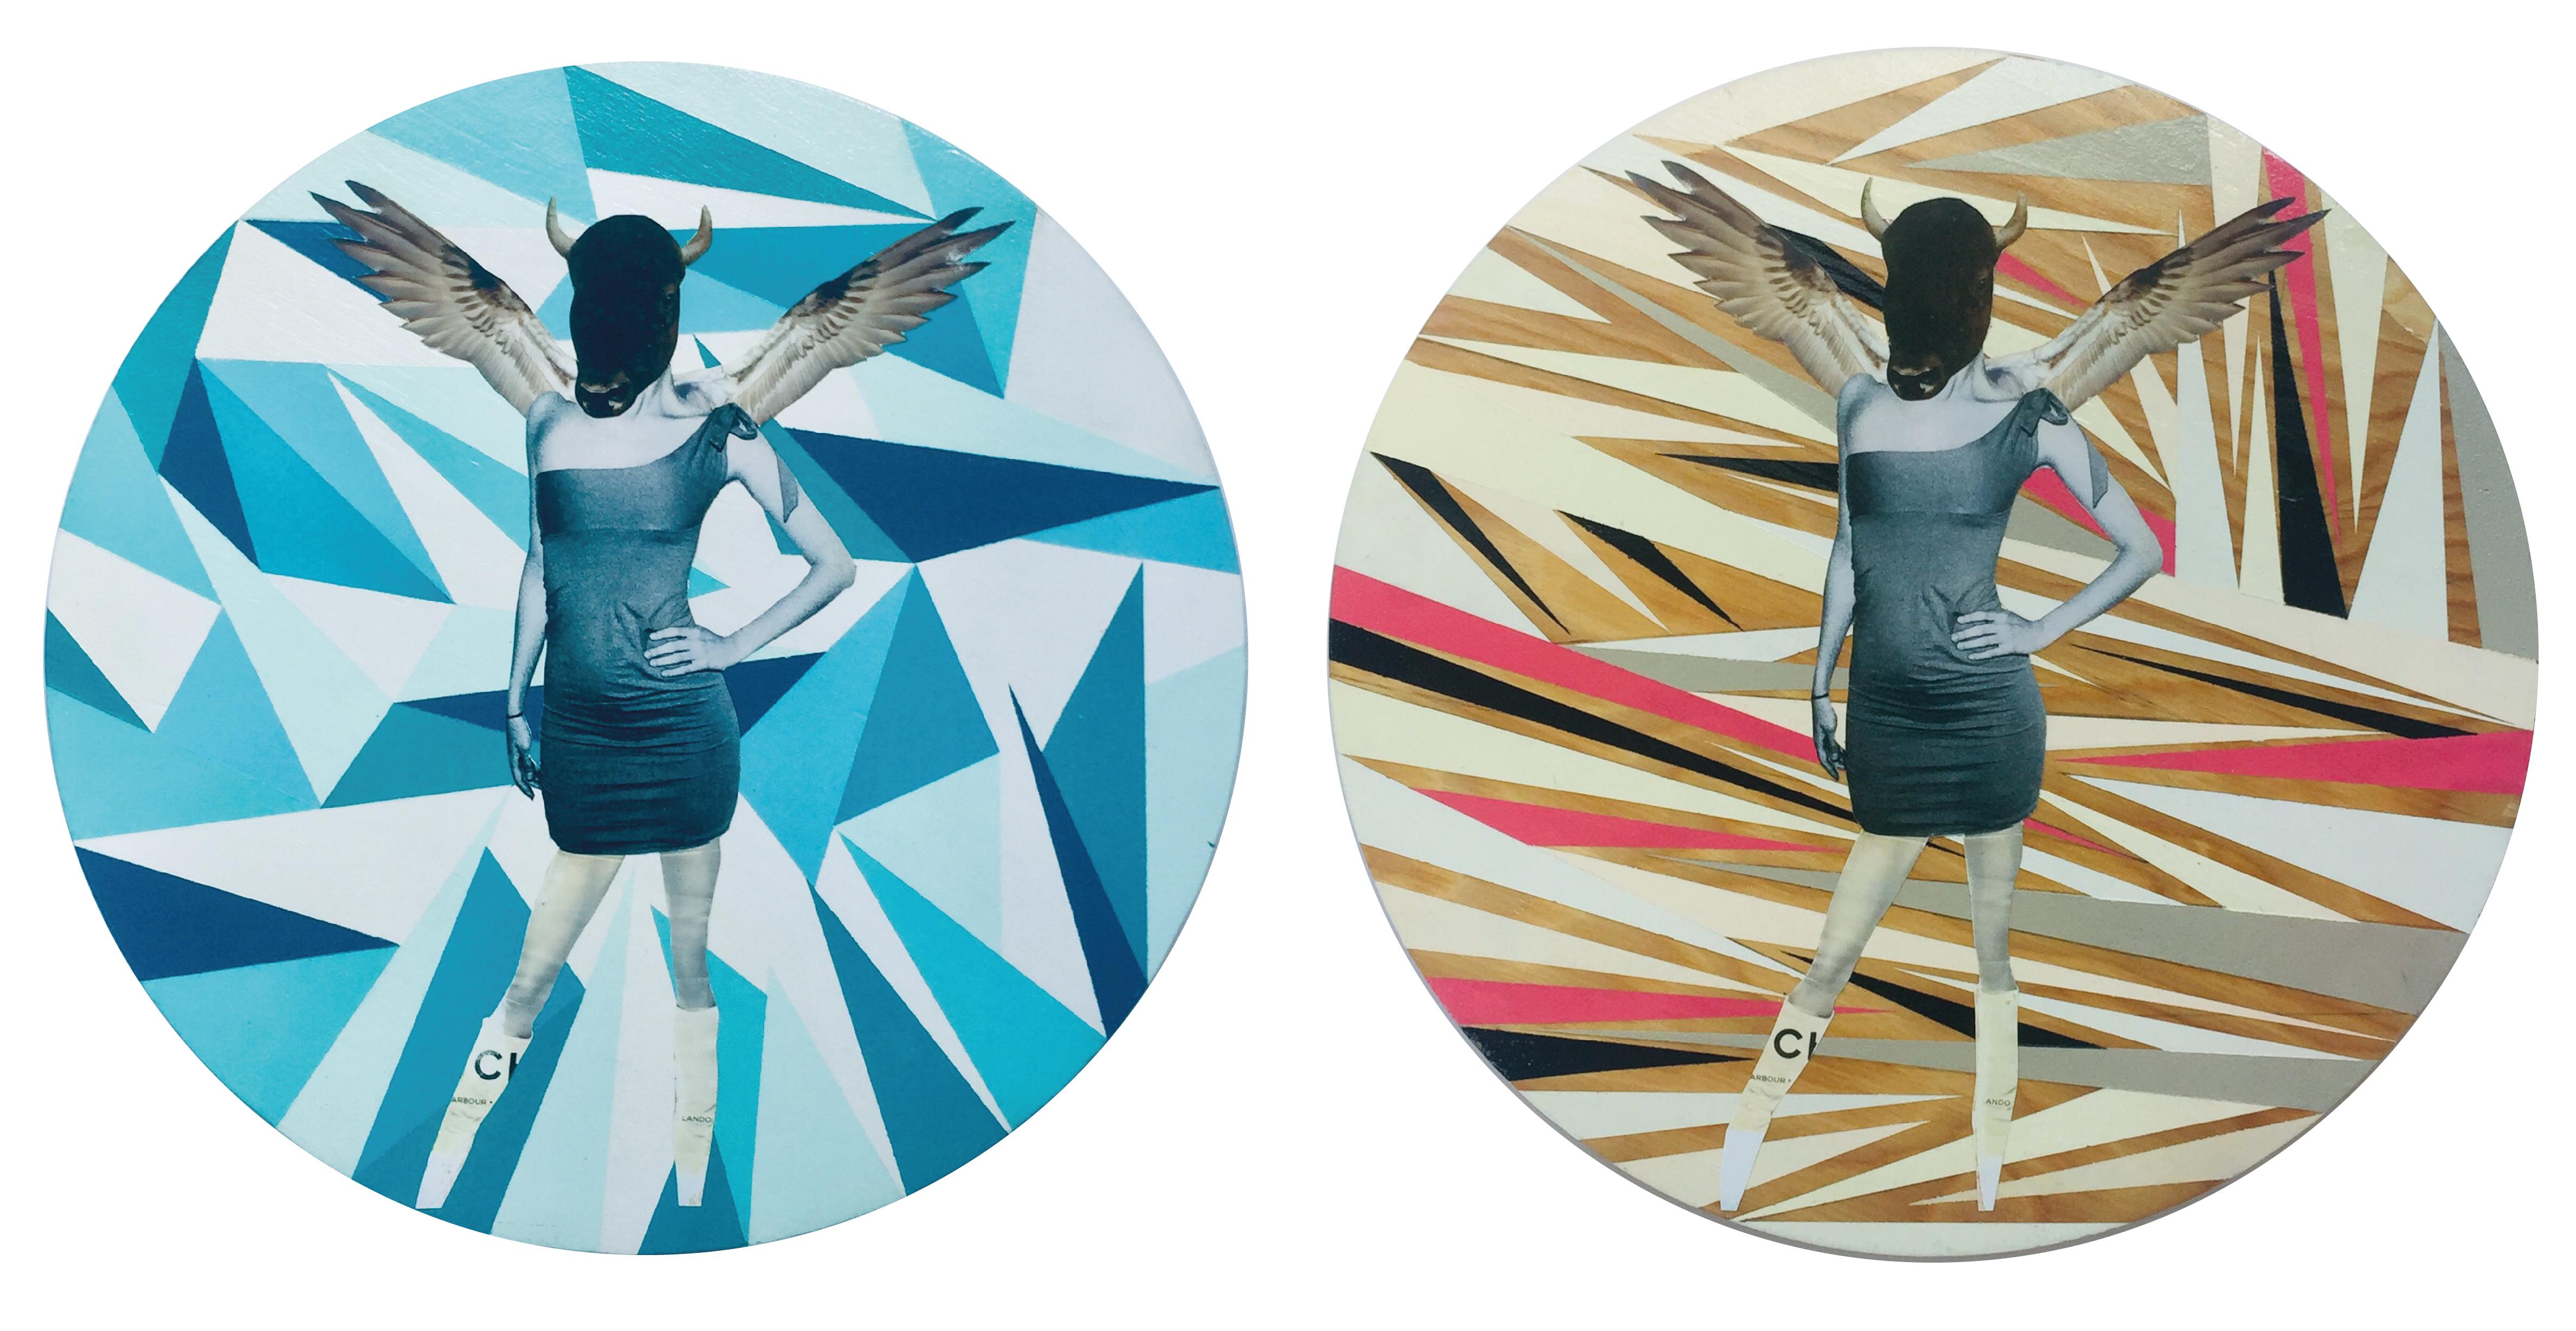 Untitled 10 and Untitled No.11 Diptych, Abstract figurative Mixed Media on Wood